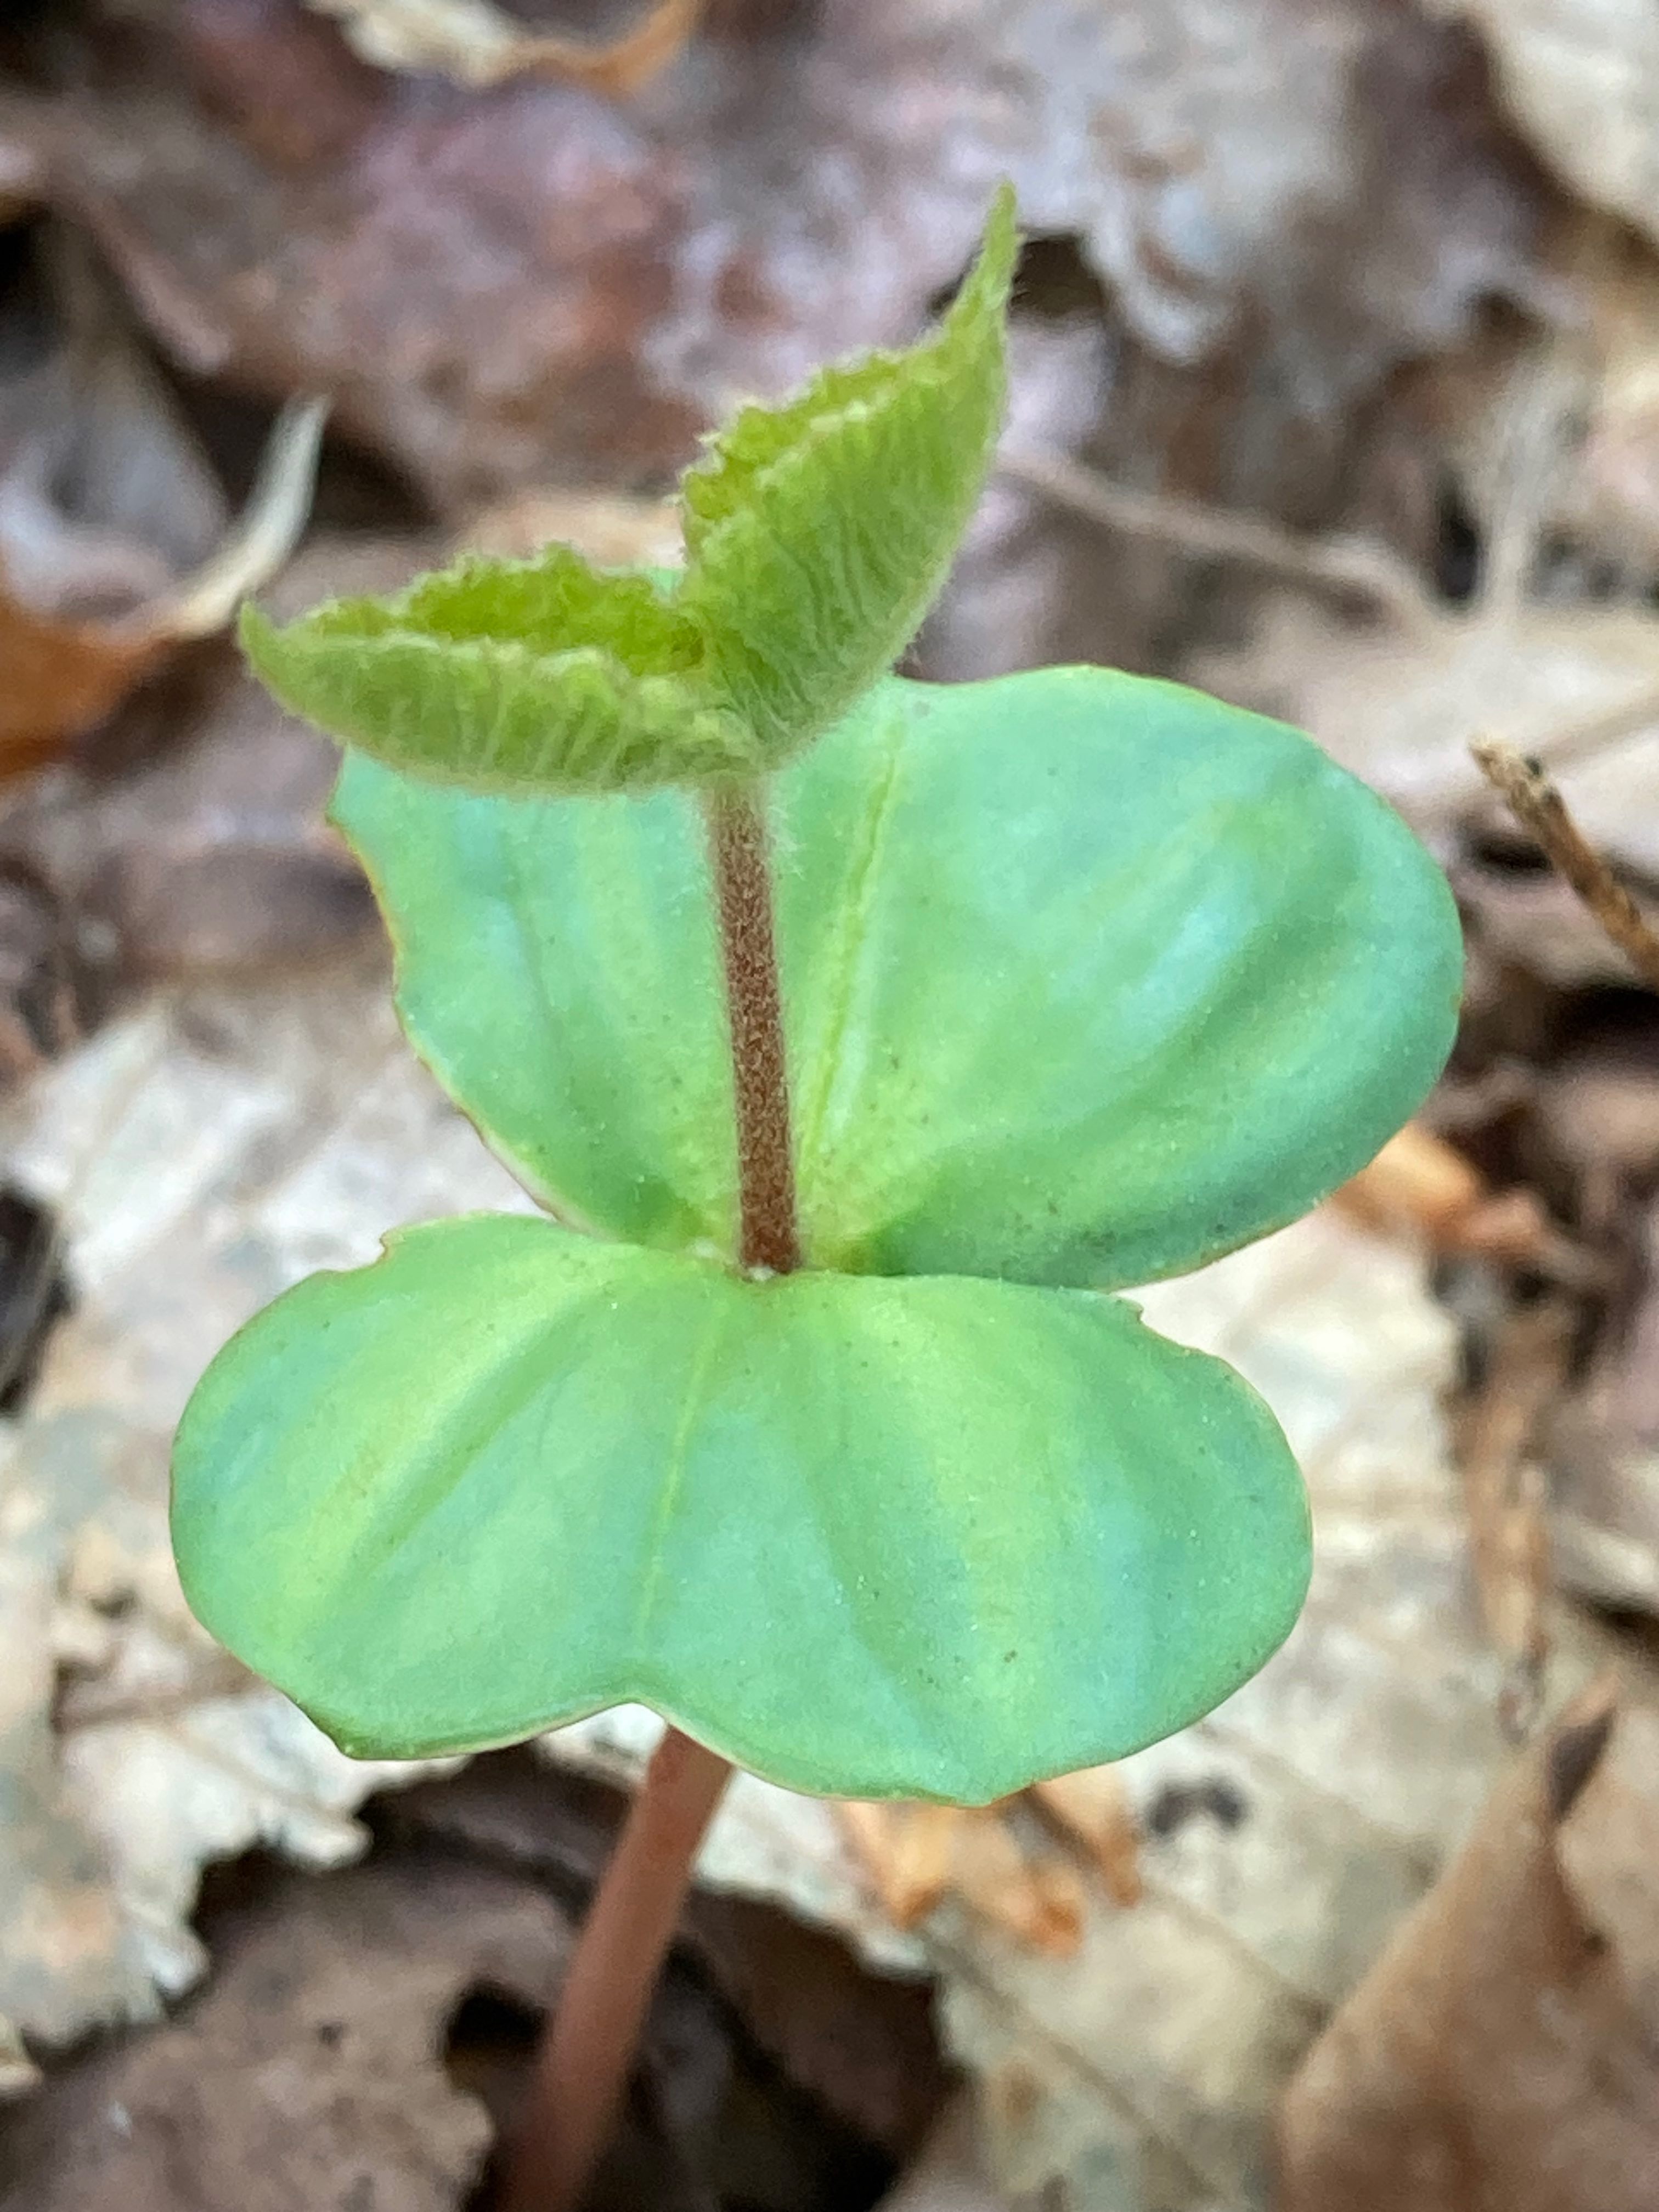 The Scientific Name is Fagus grandifolia. You will likely hear them called American Beech, Gray Beech, Red Beech, White Beech. This picture shows the Newly germinated seedling with very distinctive cotyledons. of Fagus grandifolia